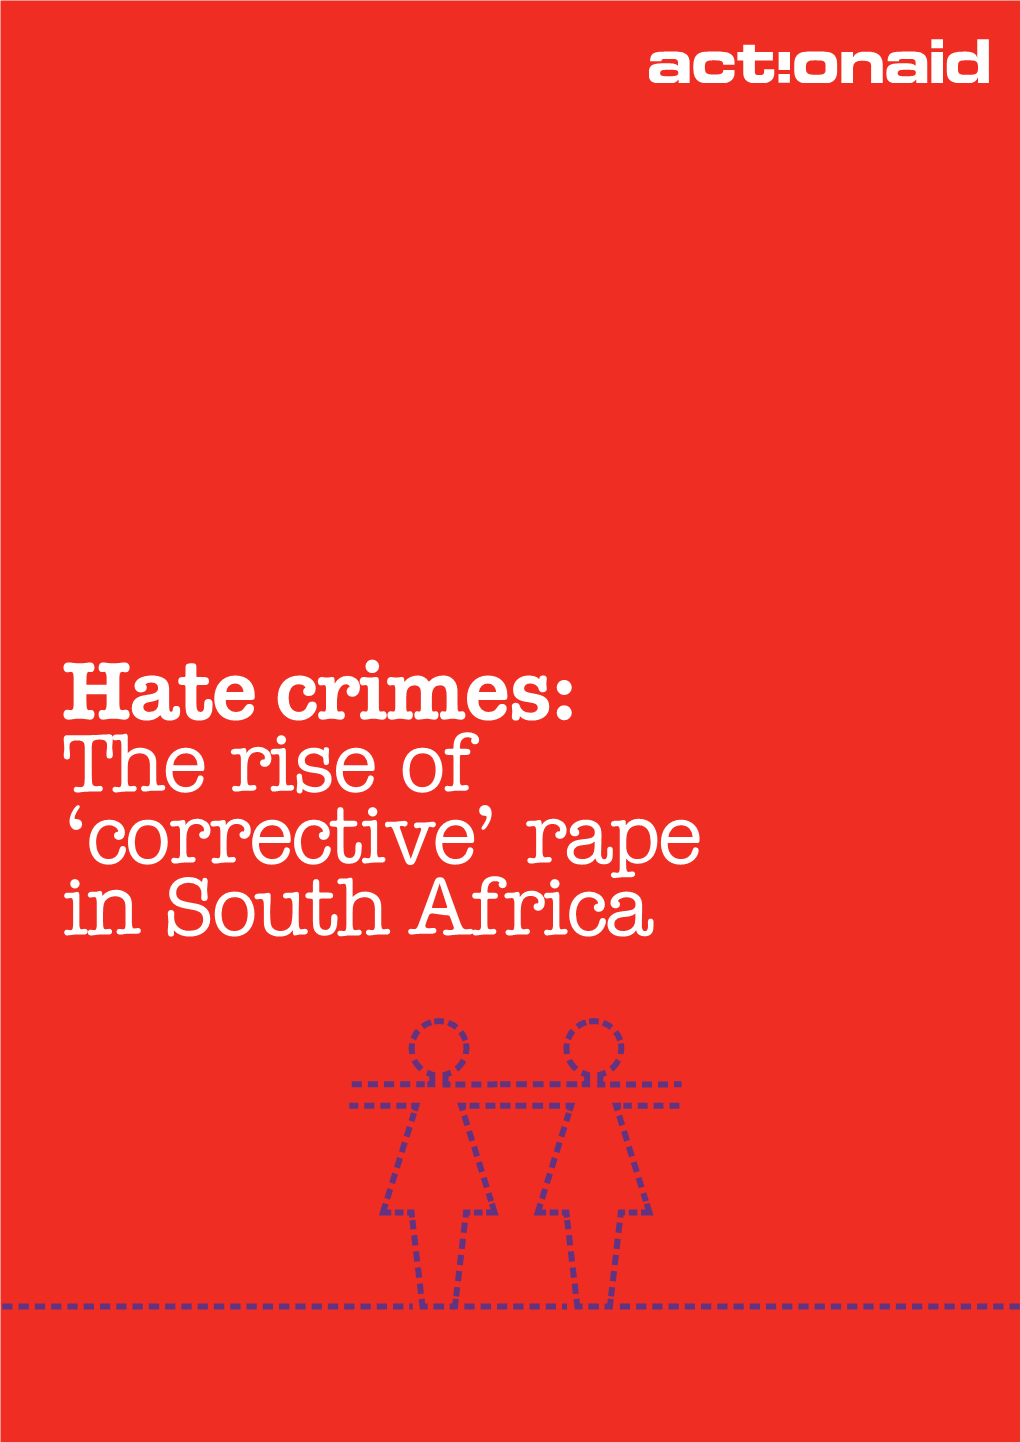 Hate Crimes: the Rise of ‘Corrective’ Rape in South Africa  Hate Crimes: the Rise of ‘Corrective’ Rape in South Africa Contents Foreword